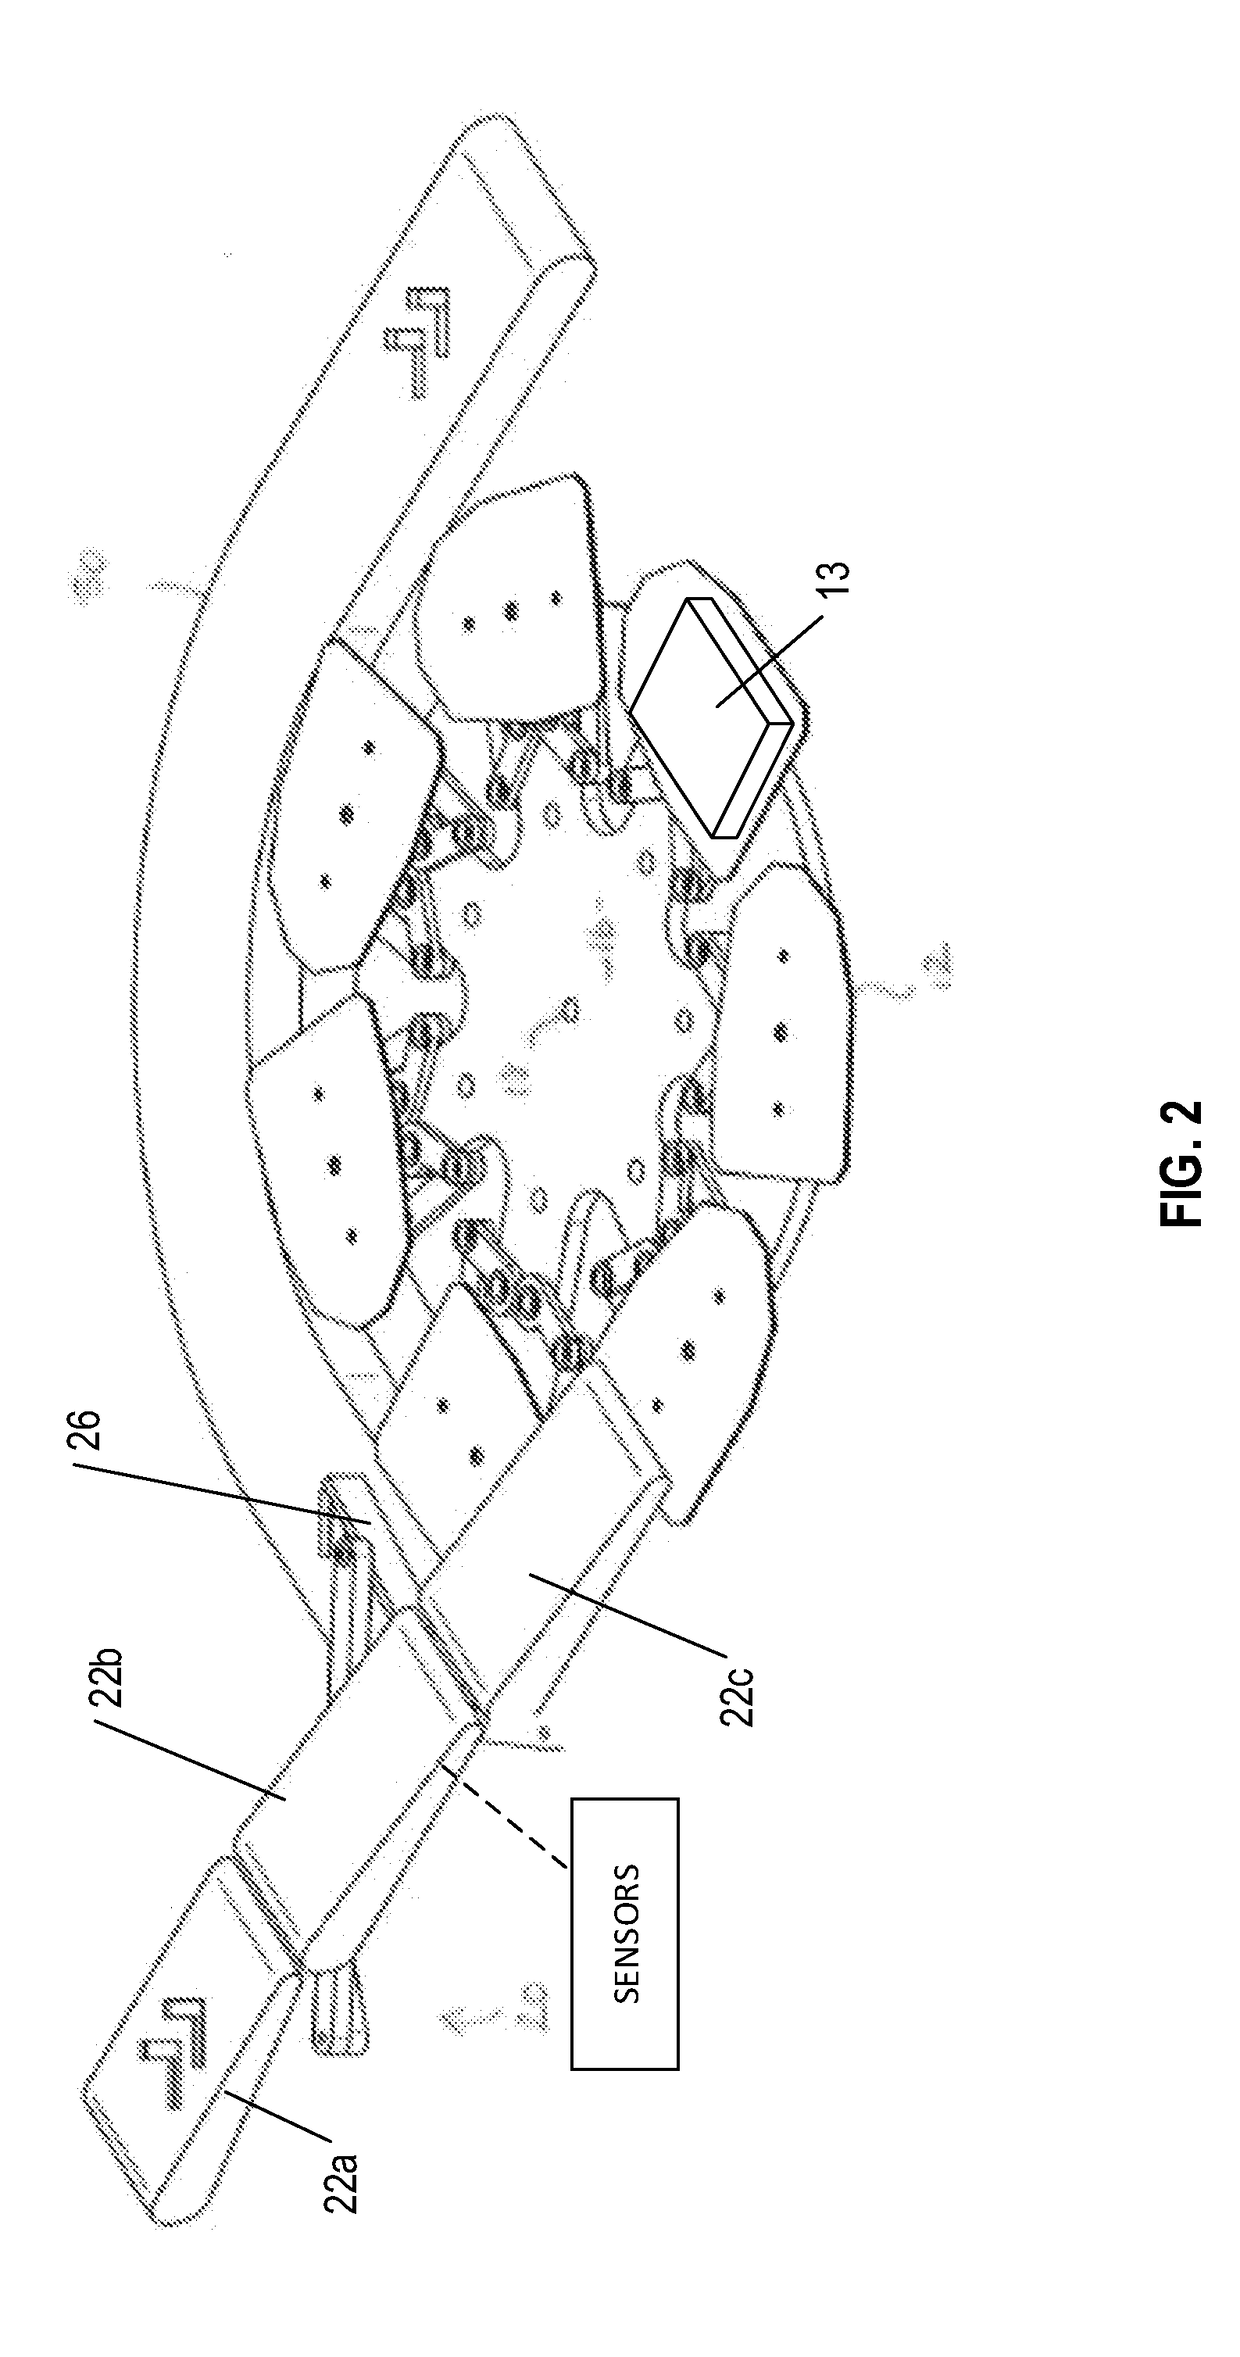 Apparatus and method for vacuumizing and sealing a package